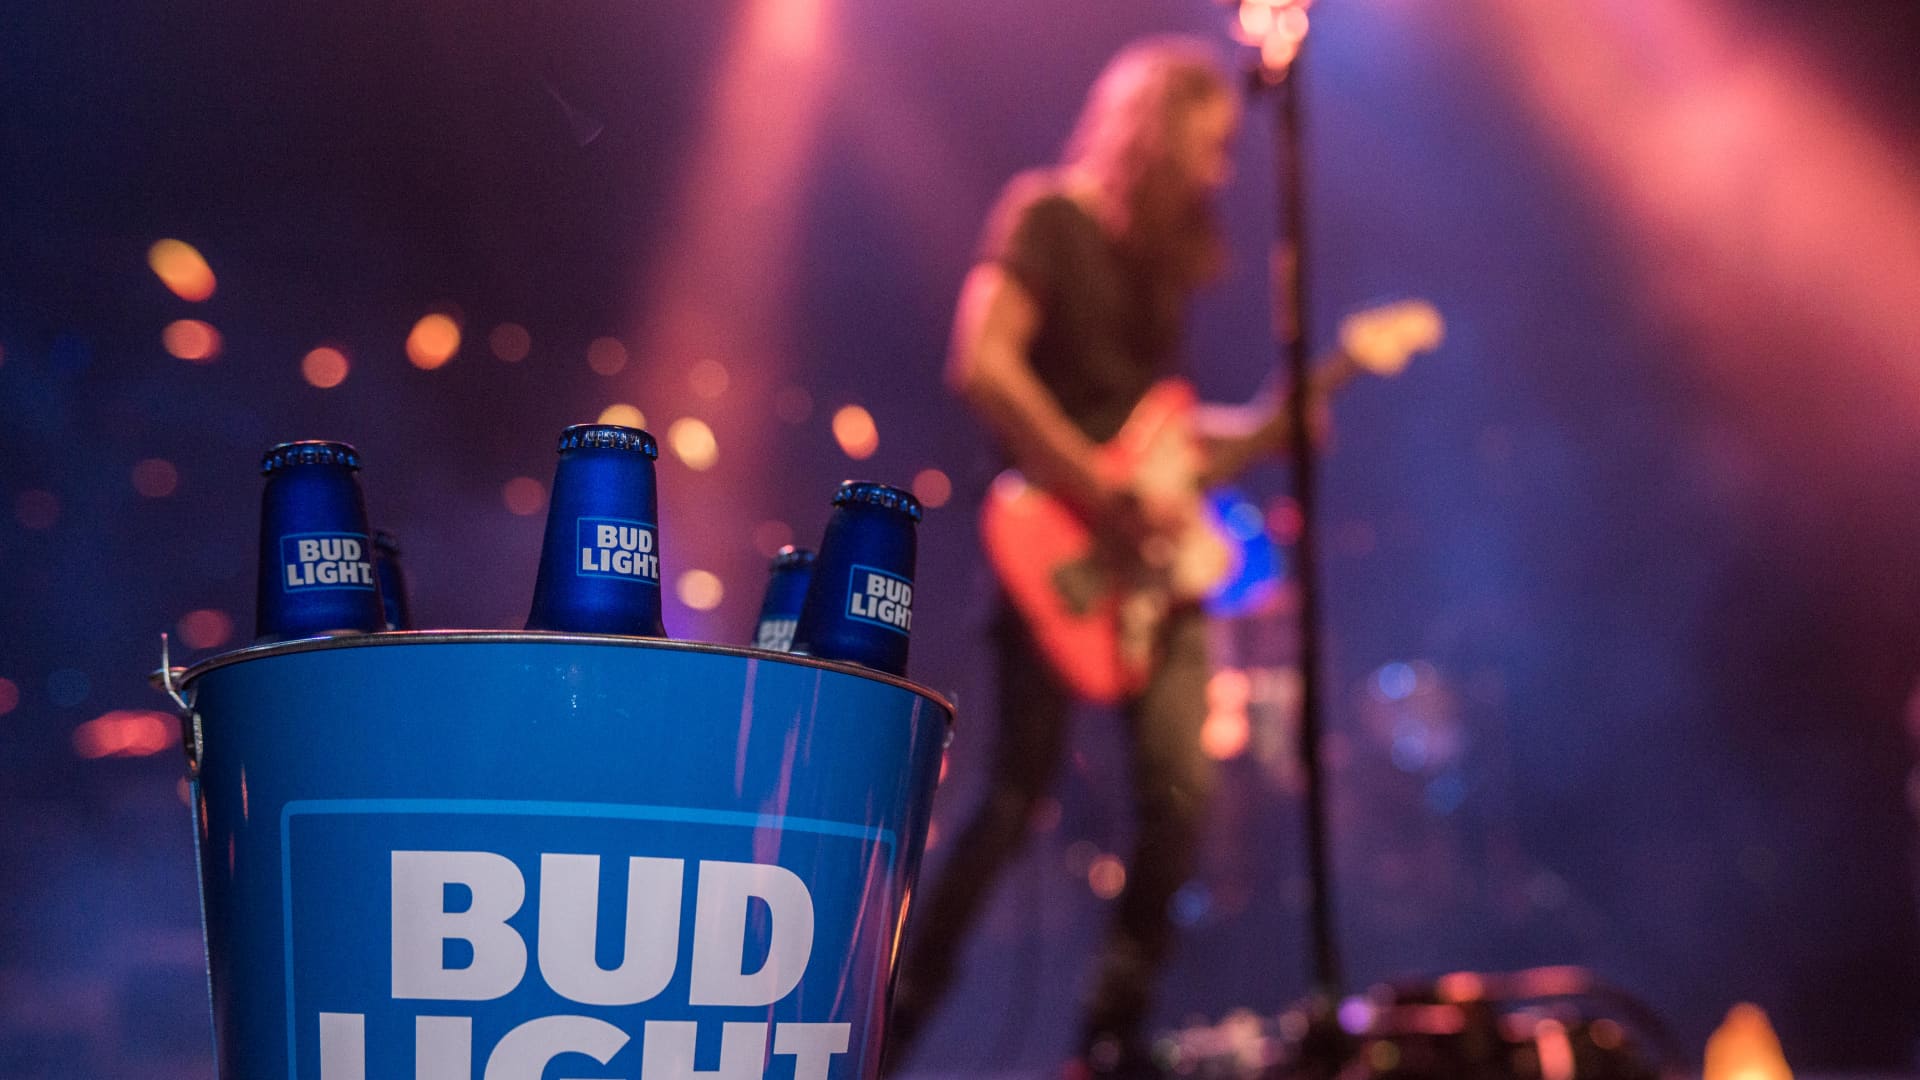 Bud Light sales may get boost from sports, concerts